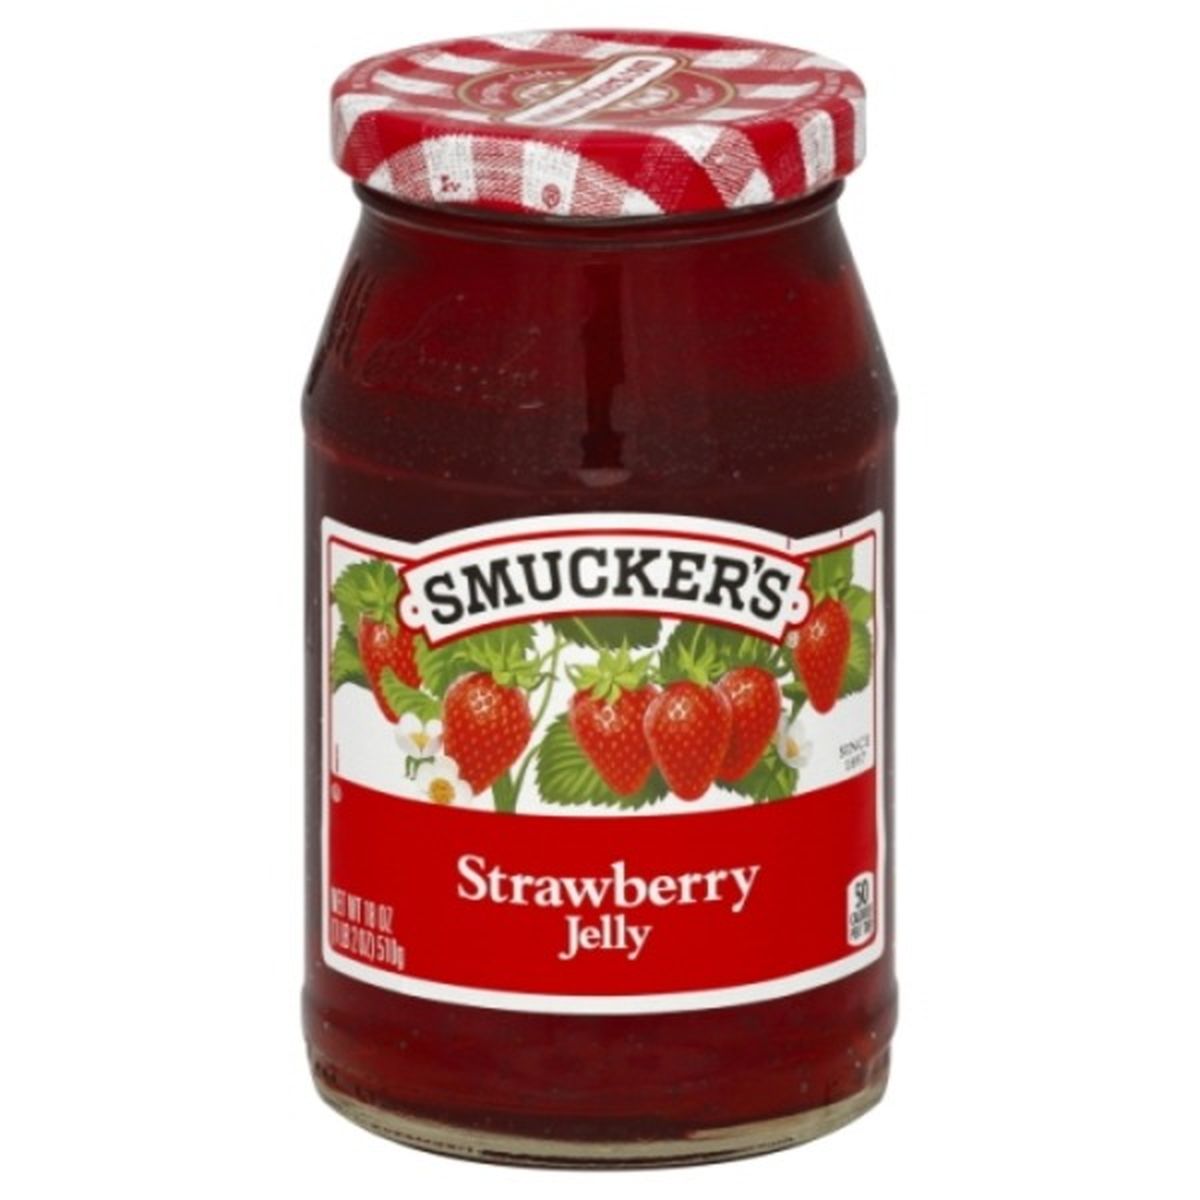 Calories in Smucker's Jelly, Strawberry